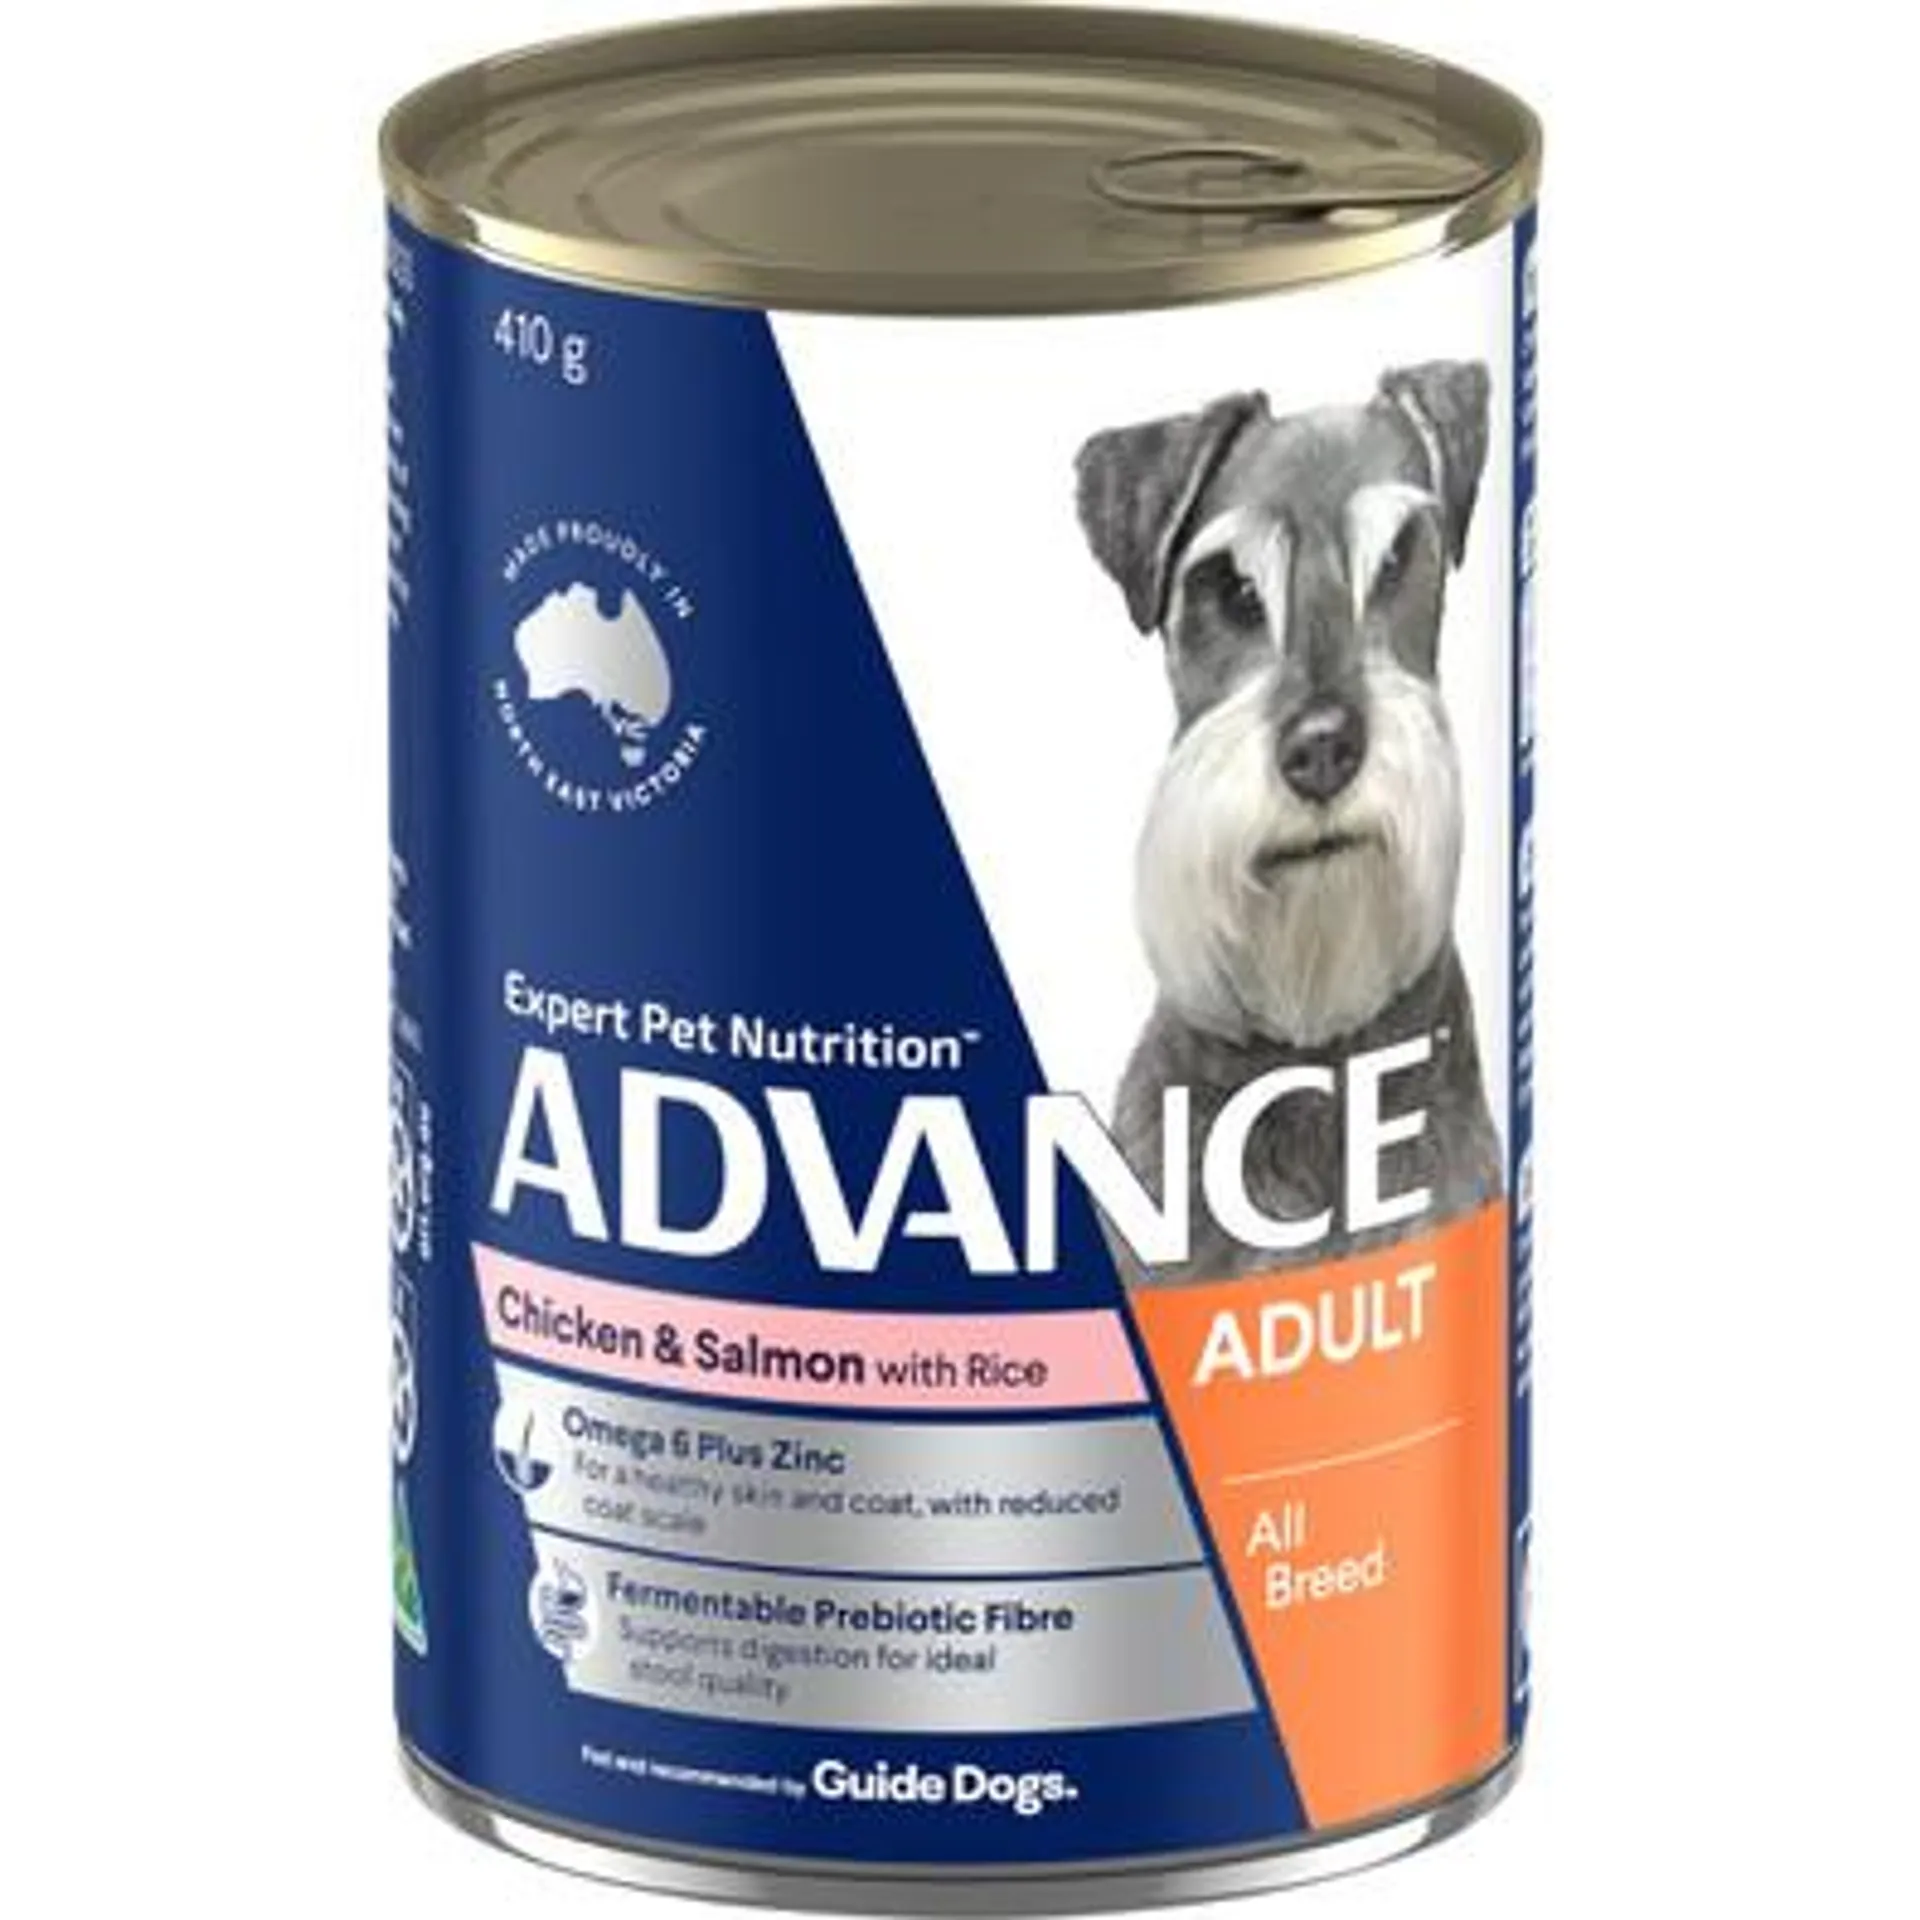 ADVANCE Adult All Breed Chicken & Salmon Wet Dog Food